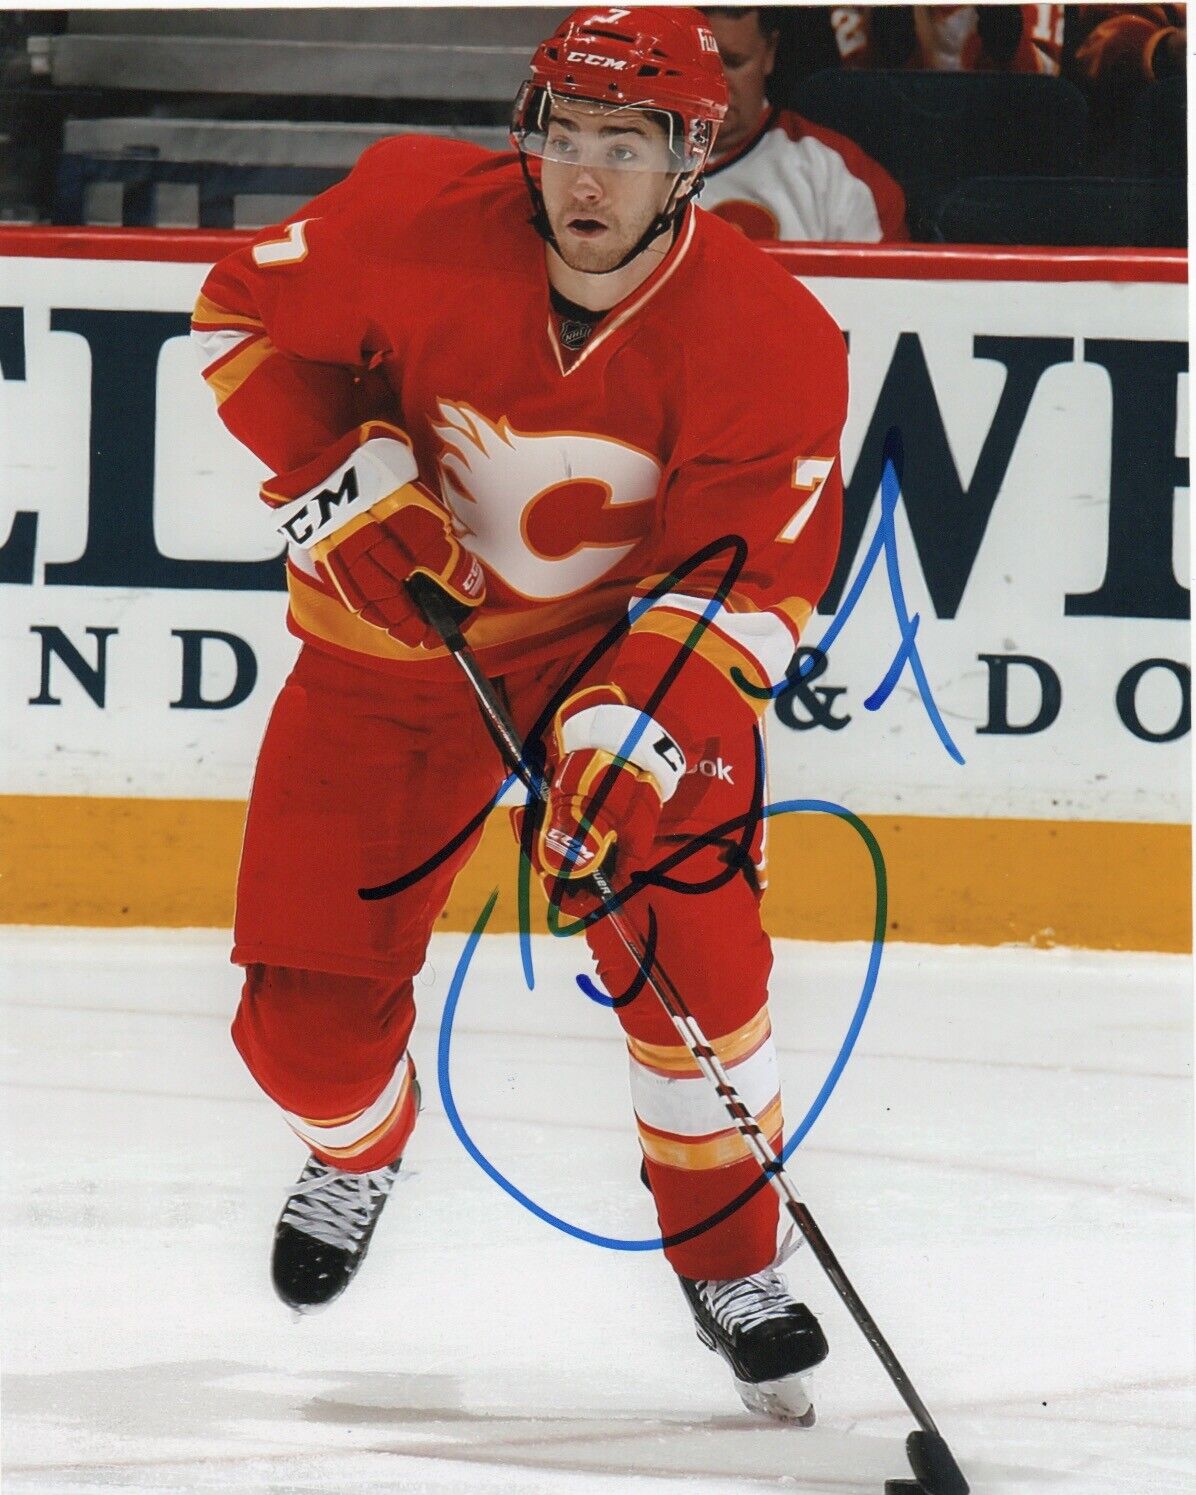 Calgary Flames TJ Brodie Autographed Signed 8x10 NHL Photo Poster painting COA #4